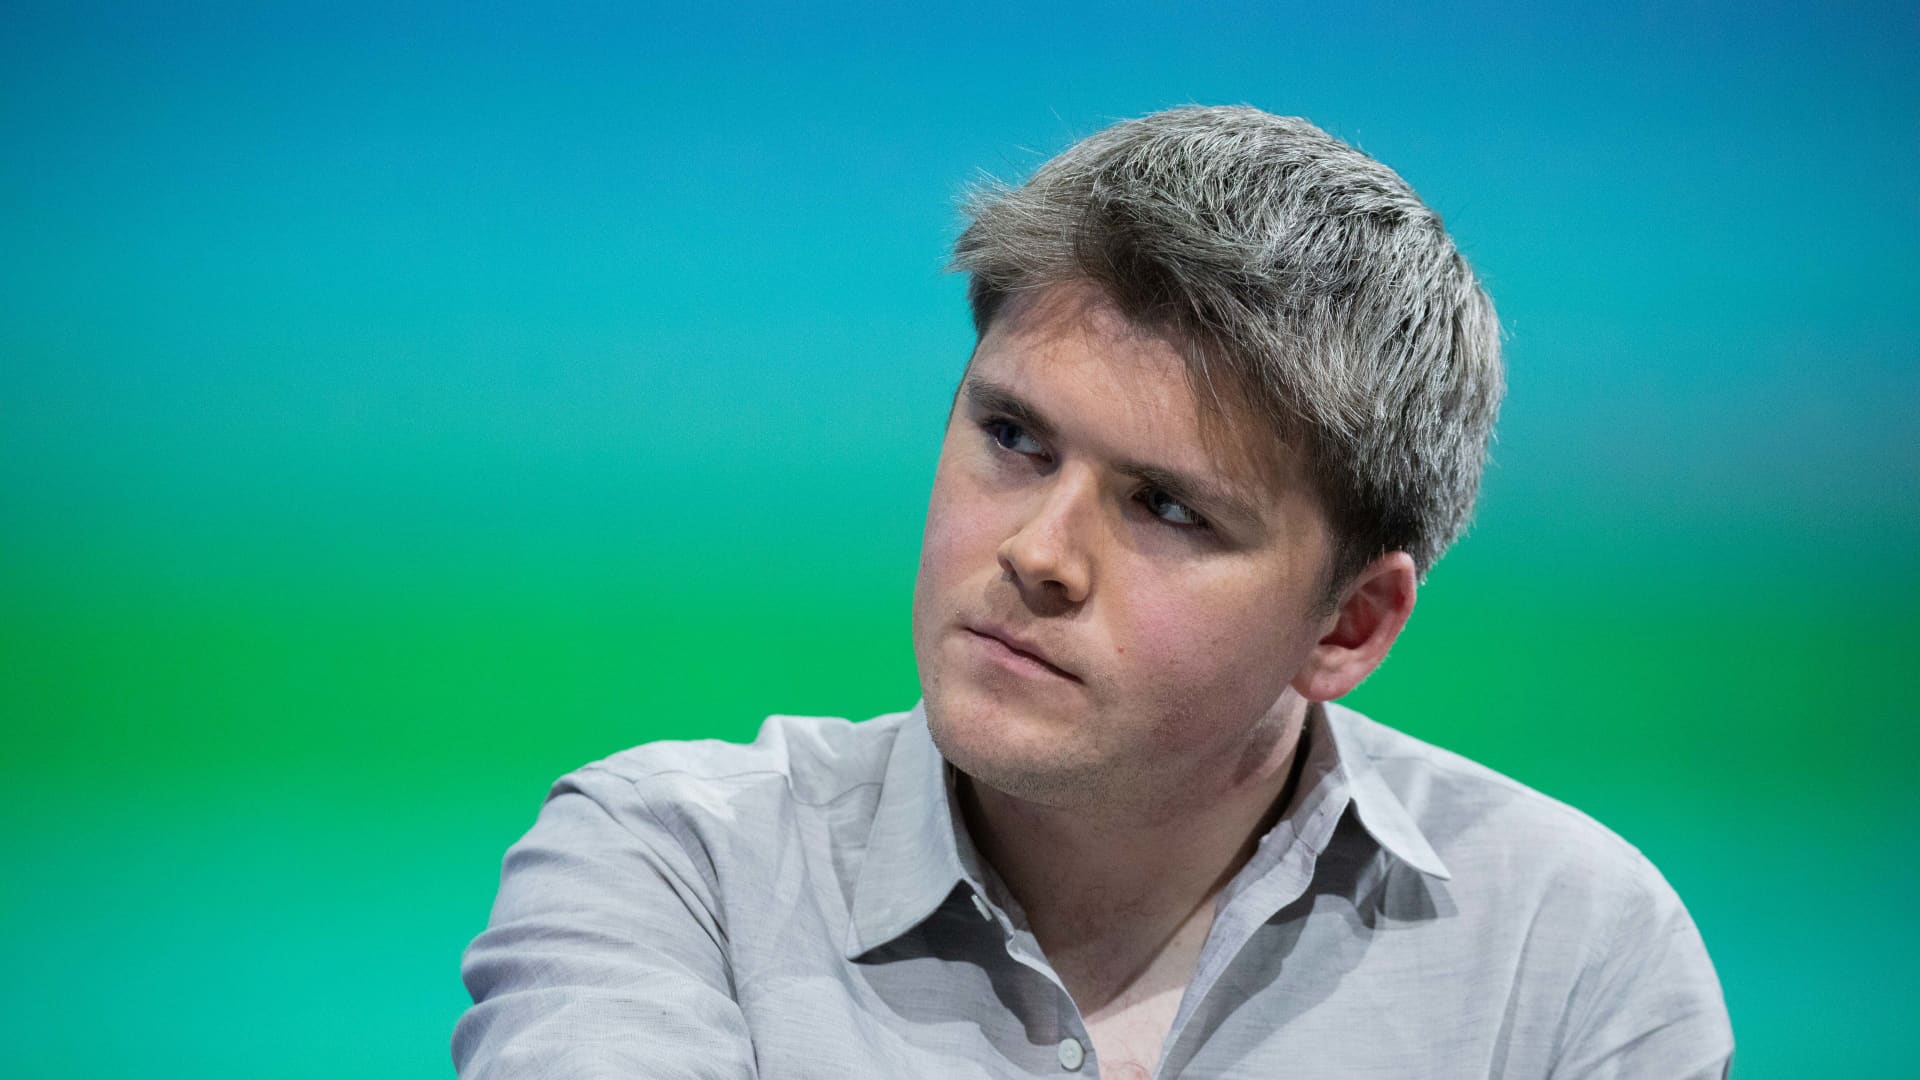 Stripe co-founder states giant curiosity costs worn out ‘wackiest’ ideas